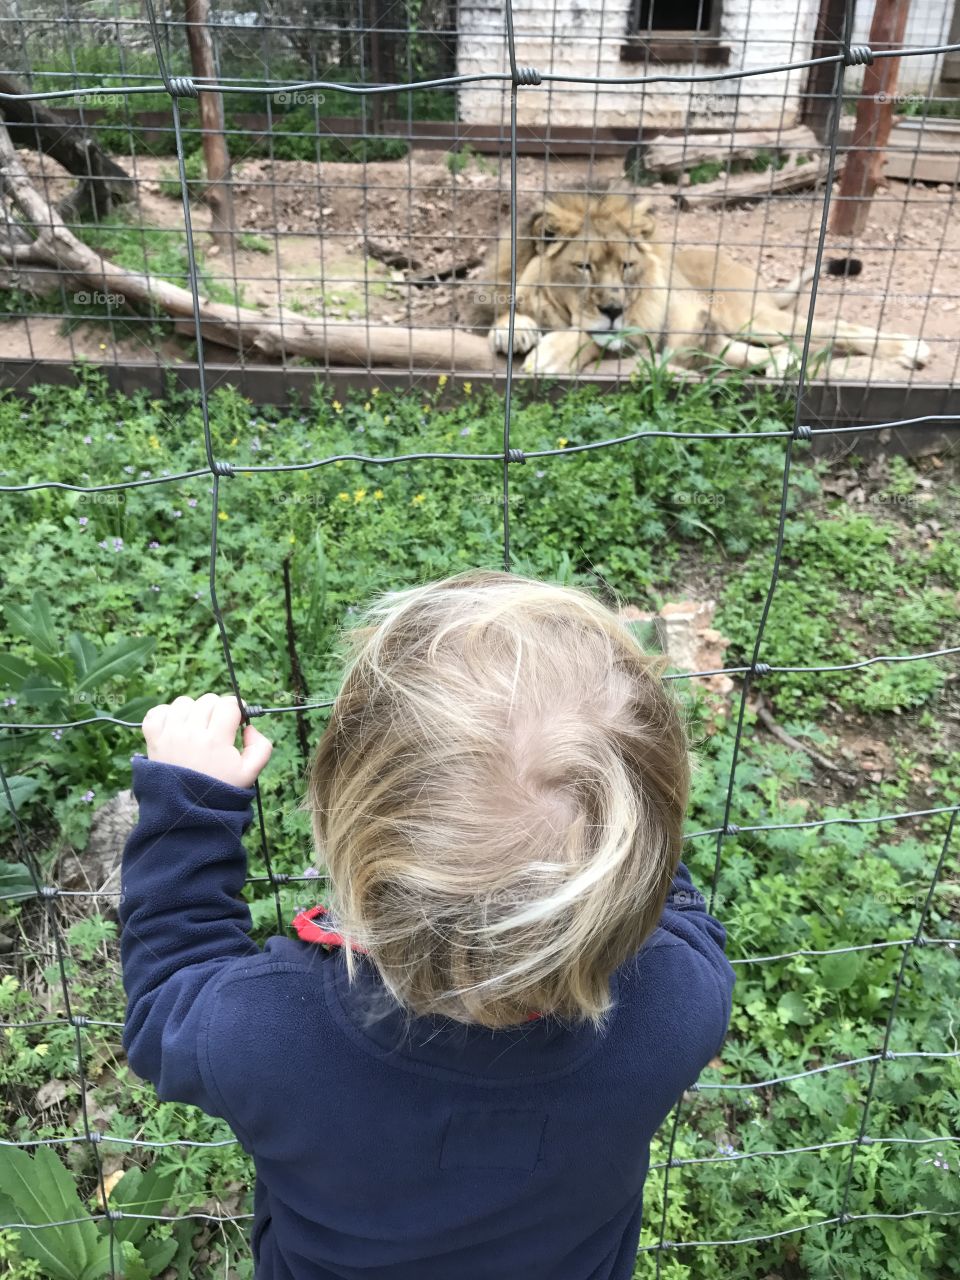 Lion and toddler at the zoo